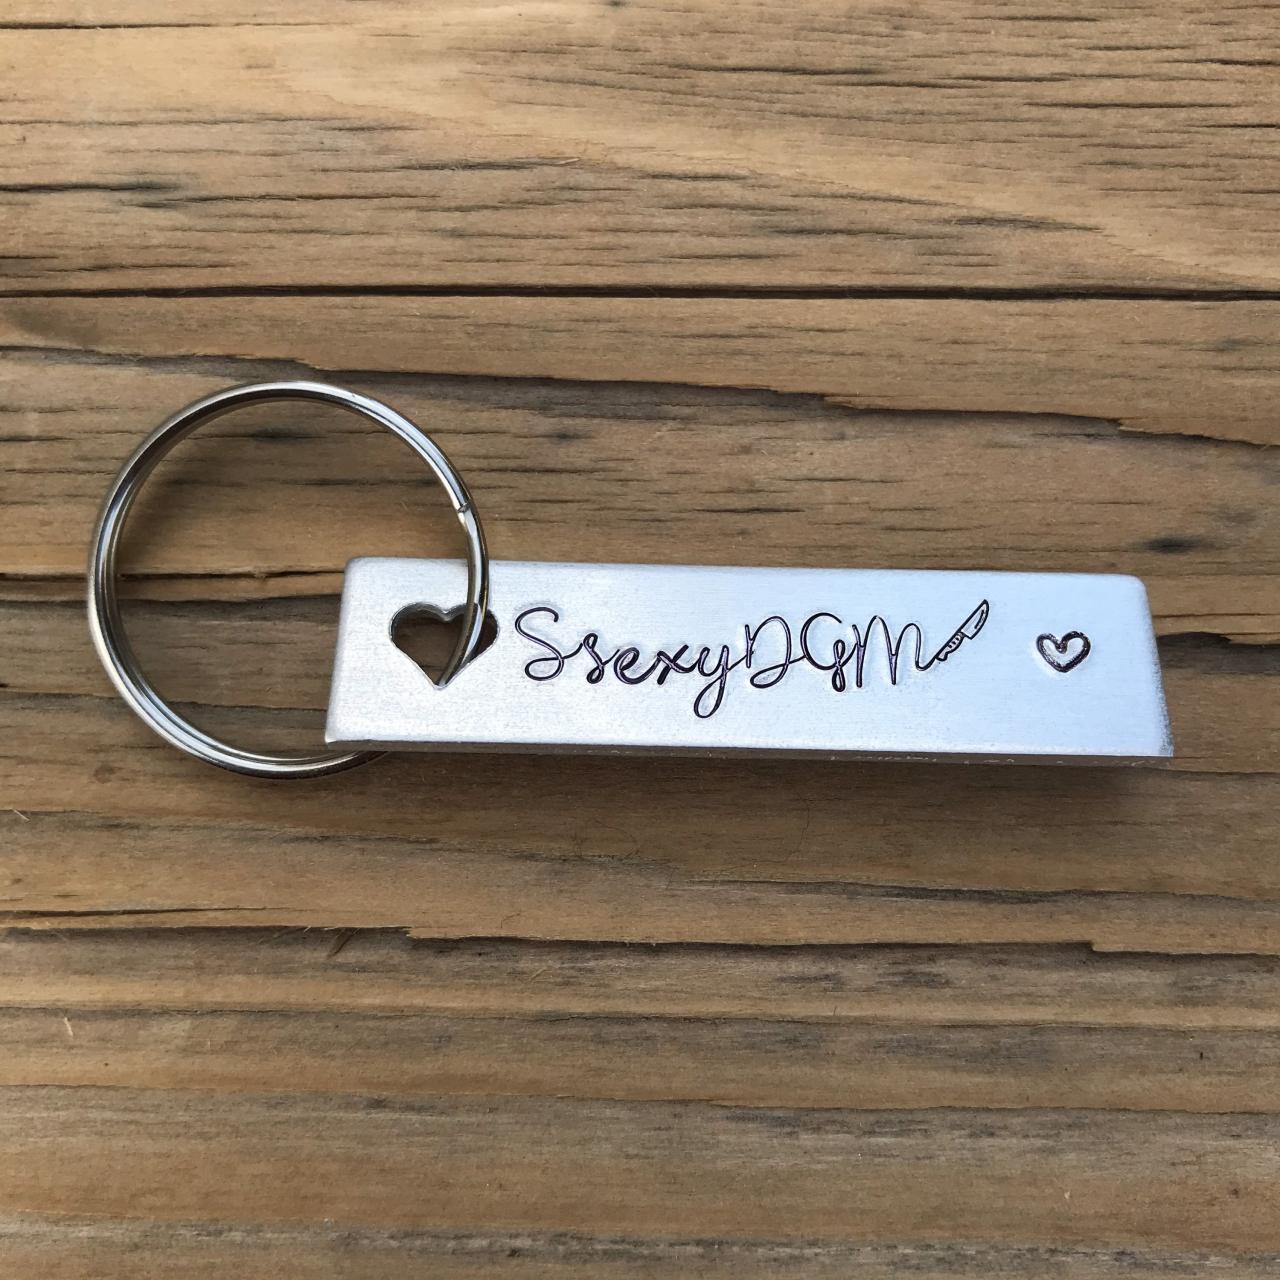 Stay Sexy Don’t Get Murdered Key Chain. Aluminum L, Fancy, Lightweight, Love, Thoughtful Gift,